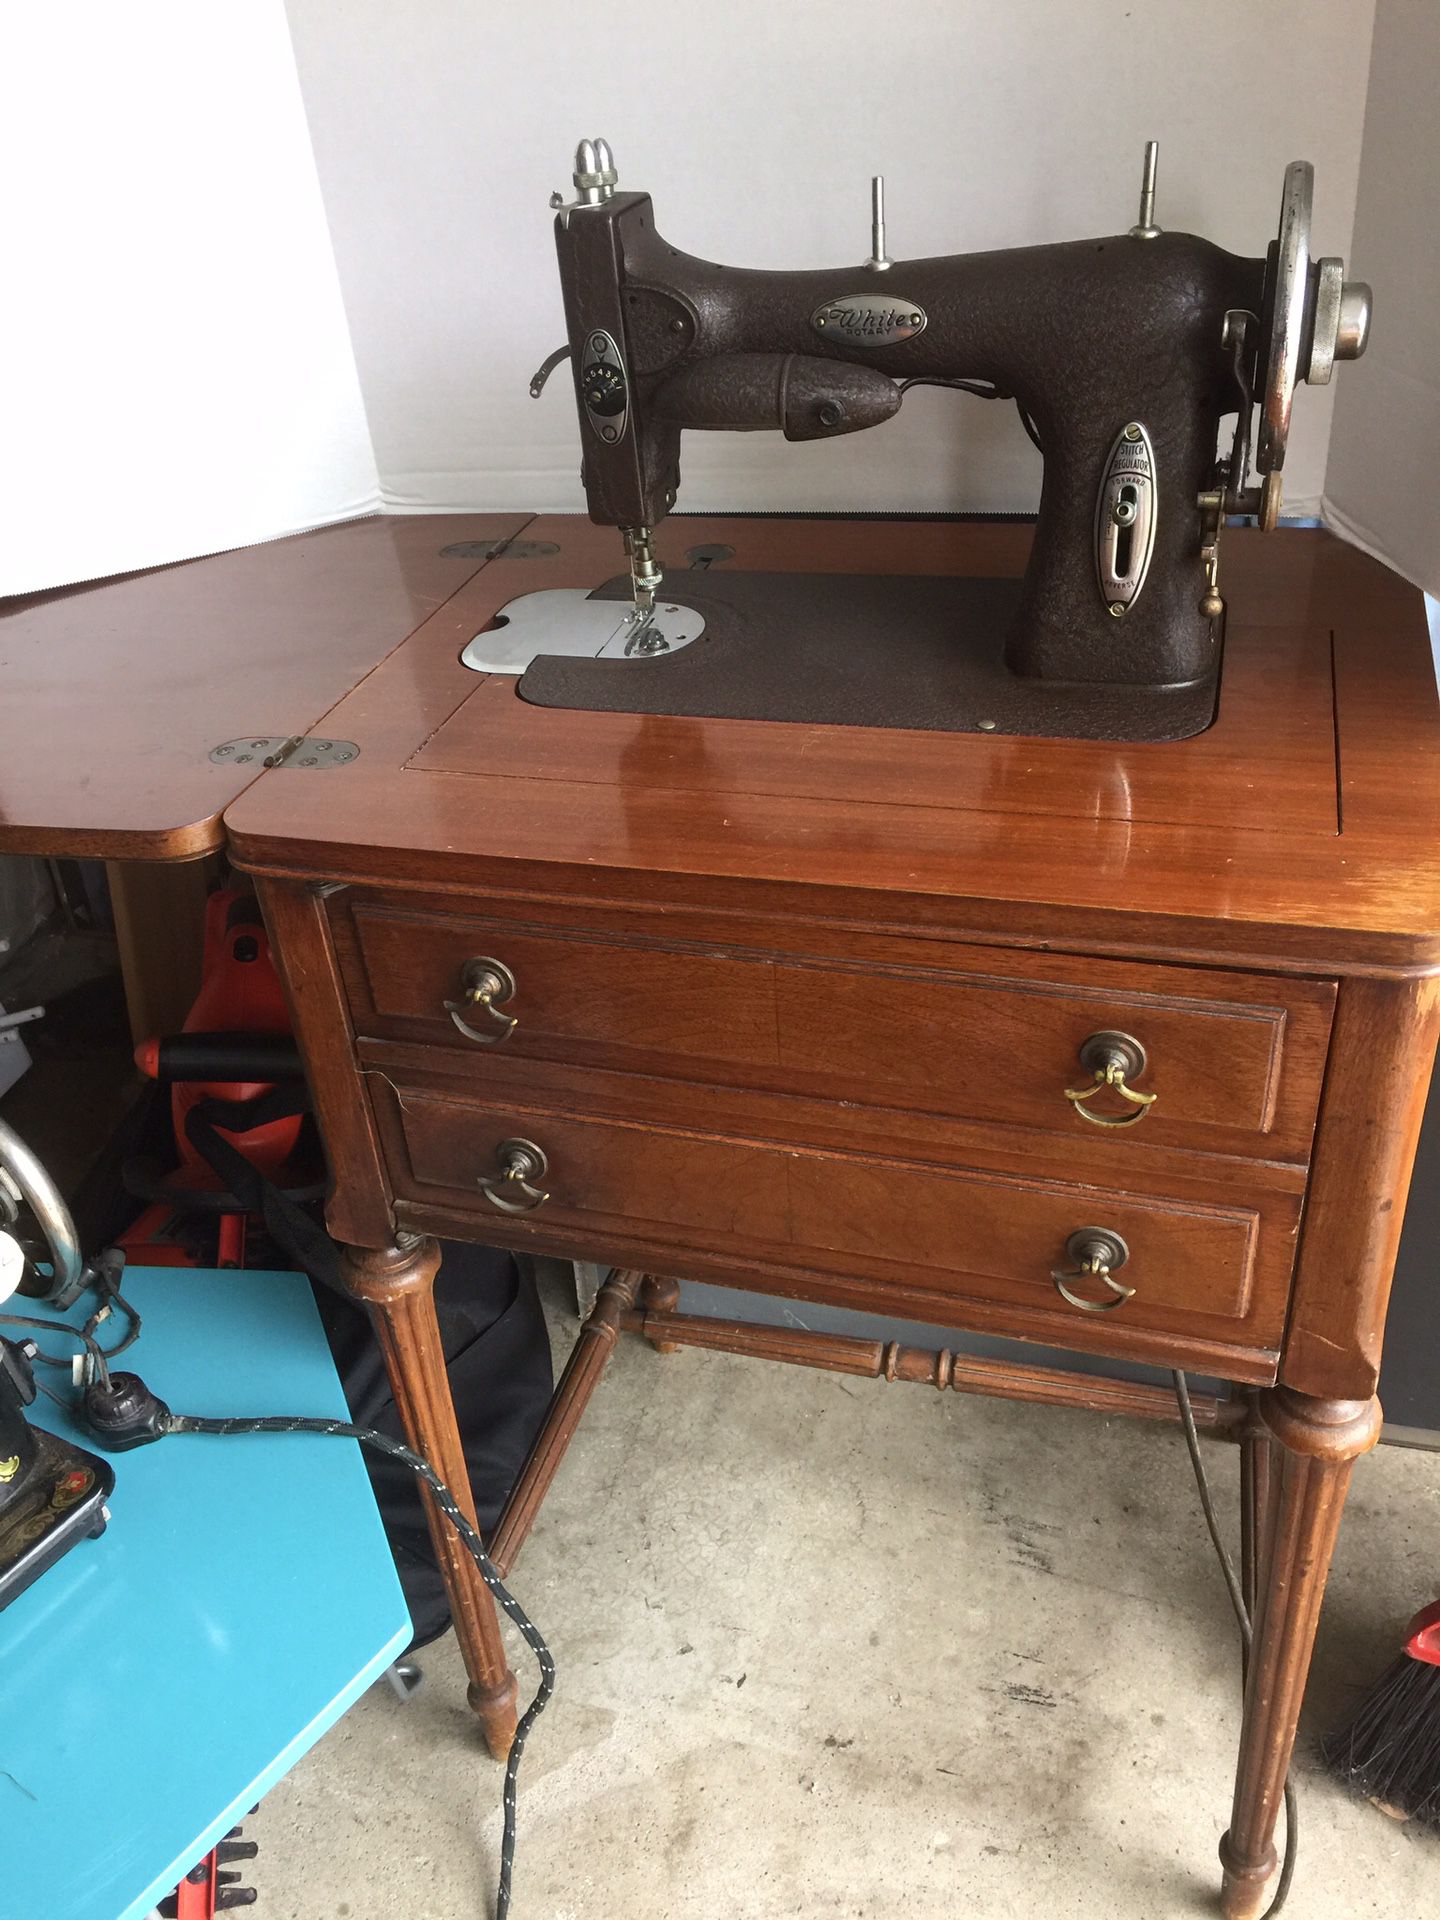 Antique sewing machine in wood cabinet